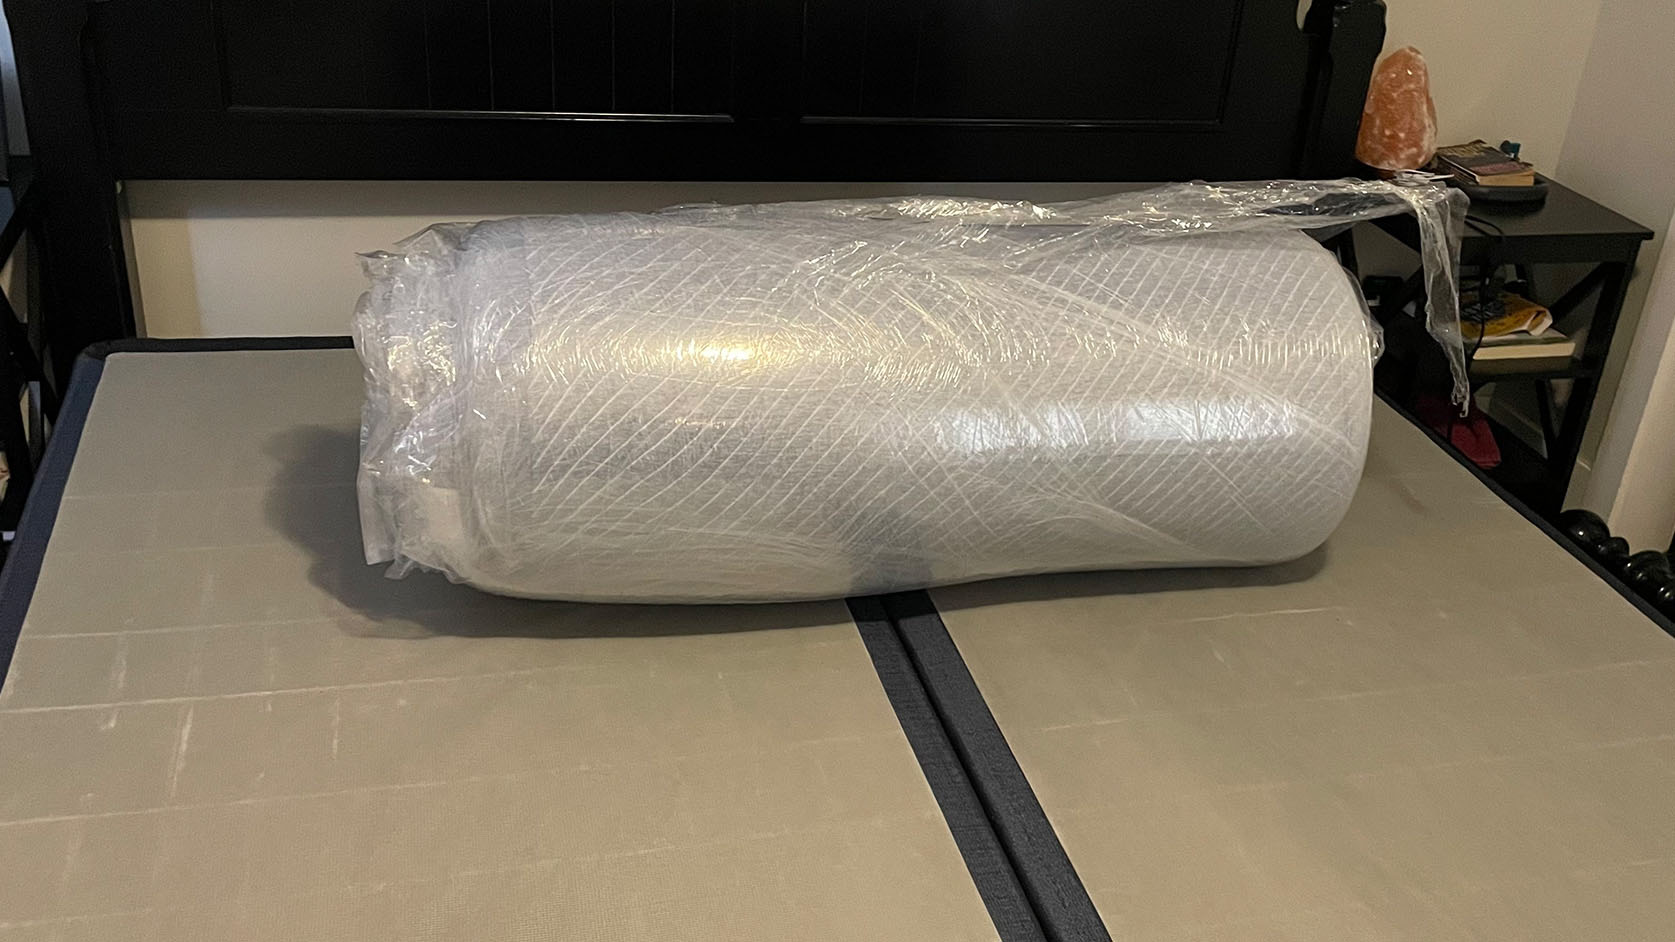 Leesa Studio mattress wrapped in plastic, vacuum-packed, on bed frame